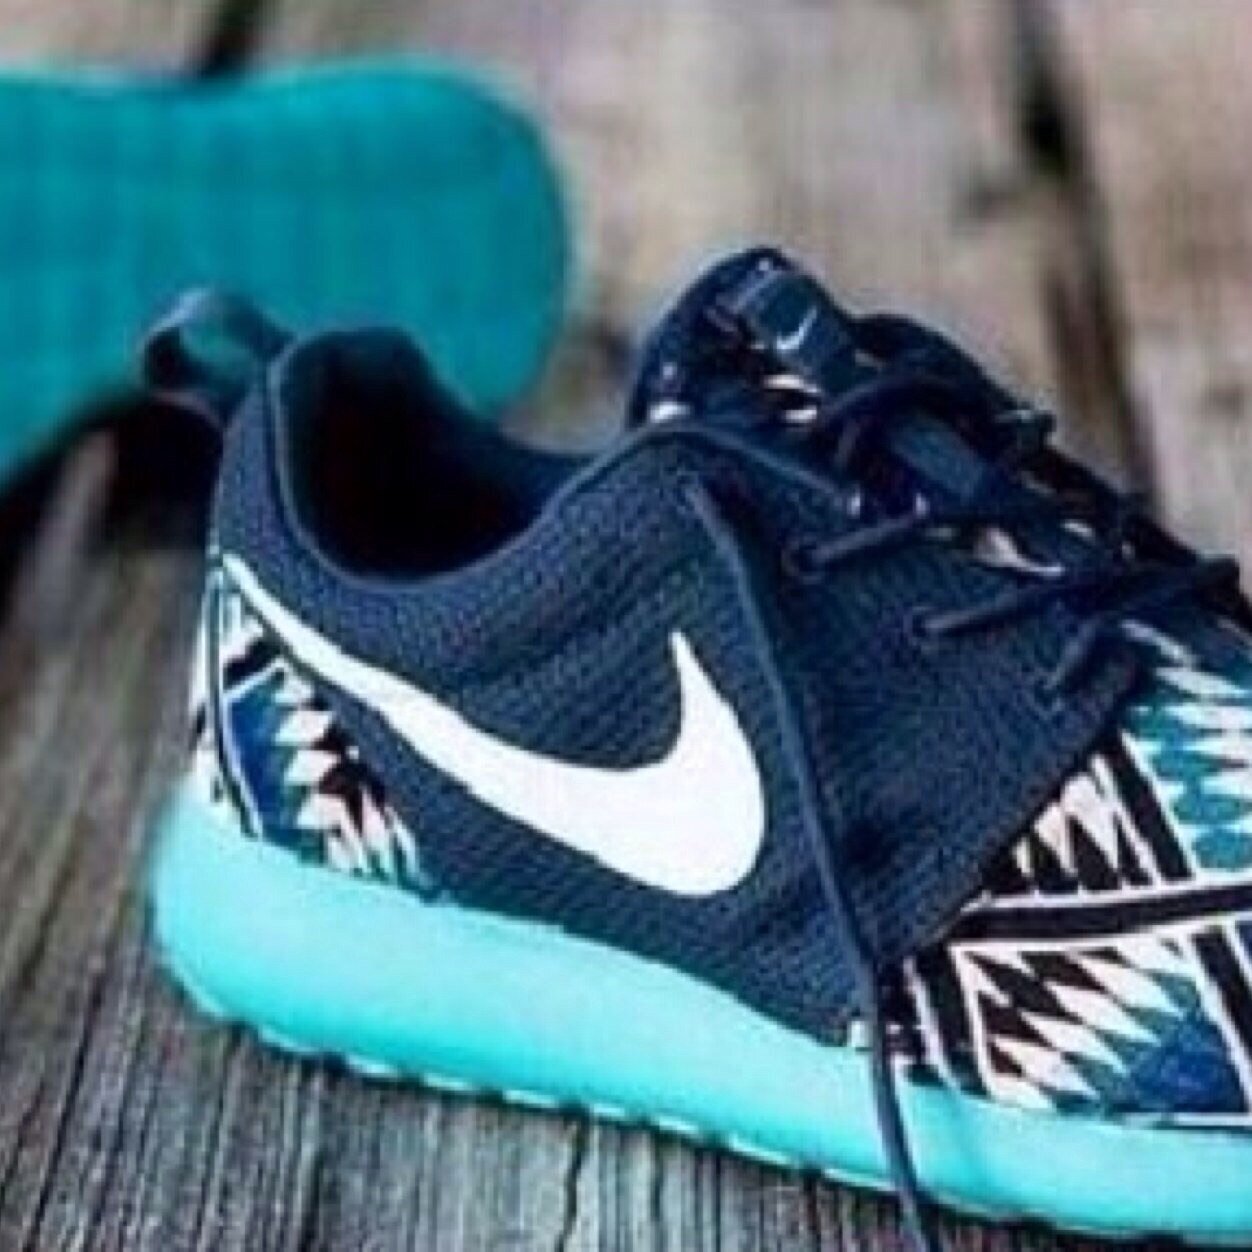 (Original Nike Roshe Account) Bringing you the coolest/nicest pairs of Nike Roshe shoes.